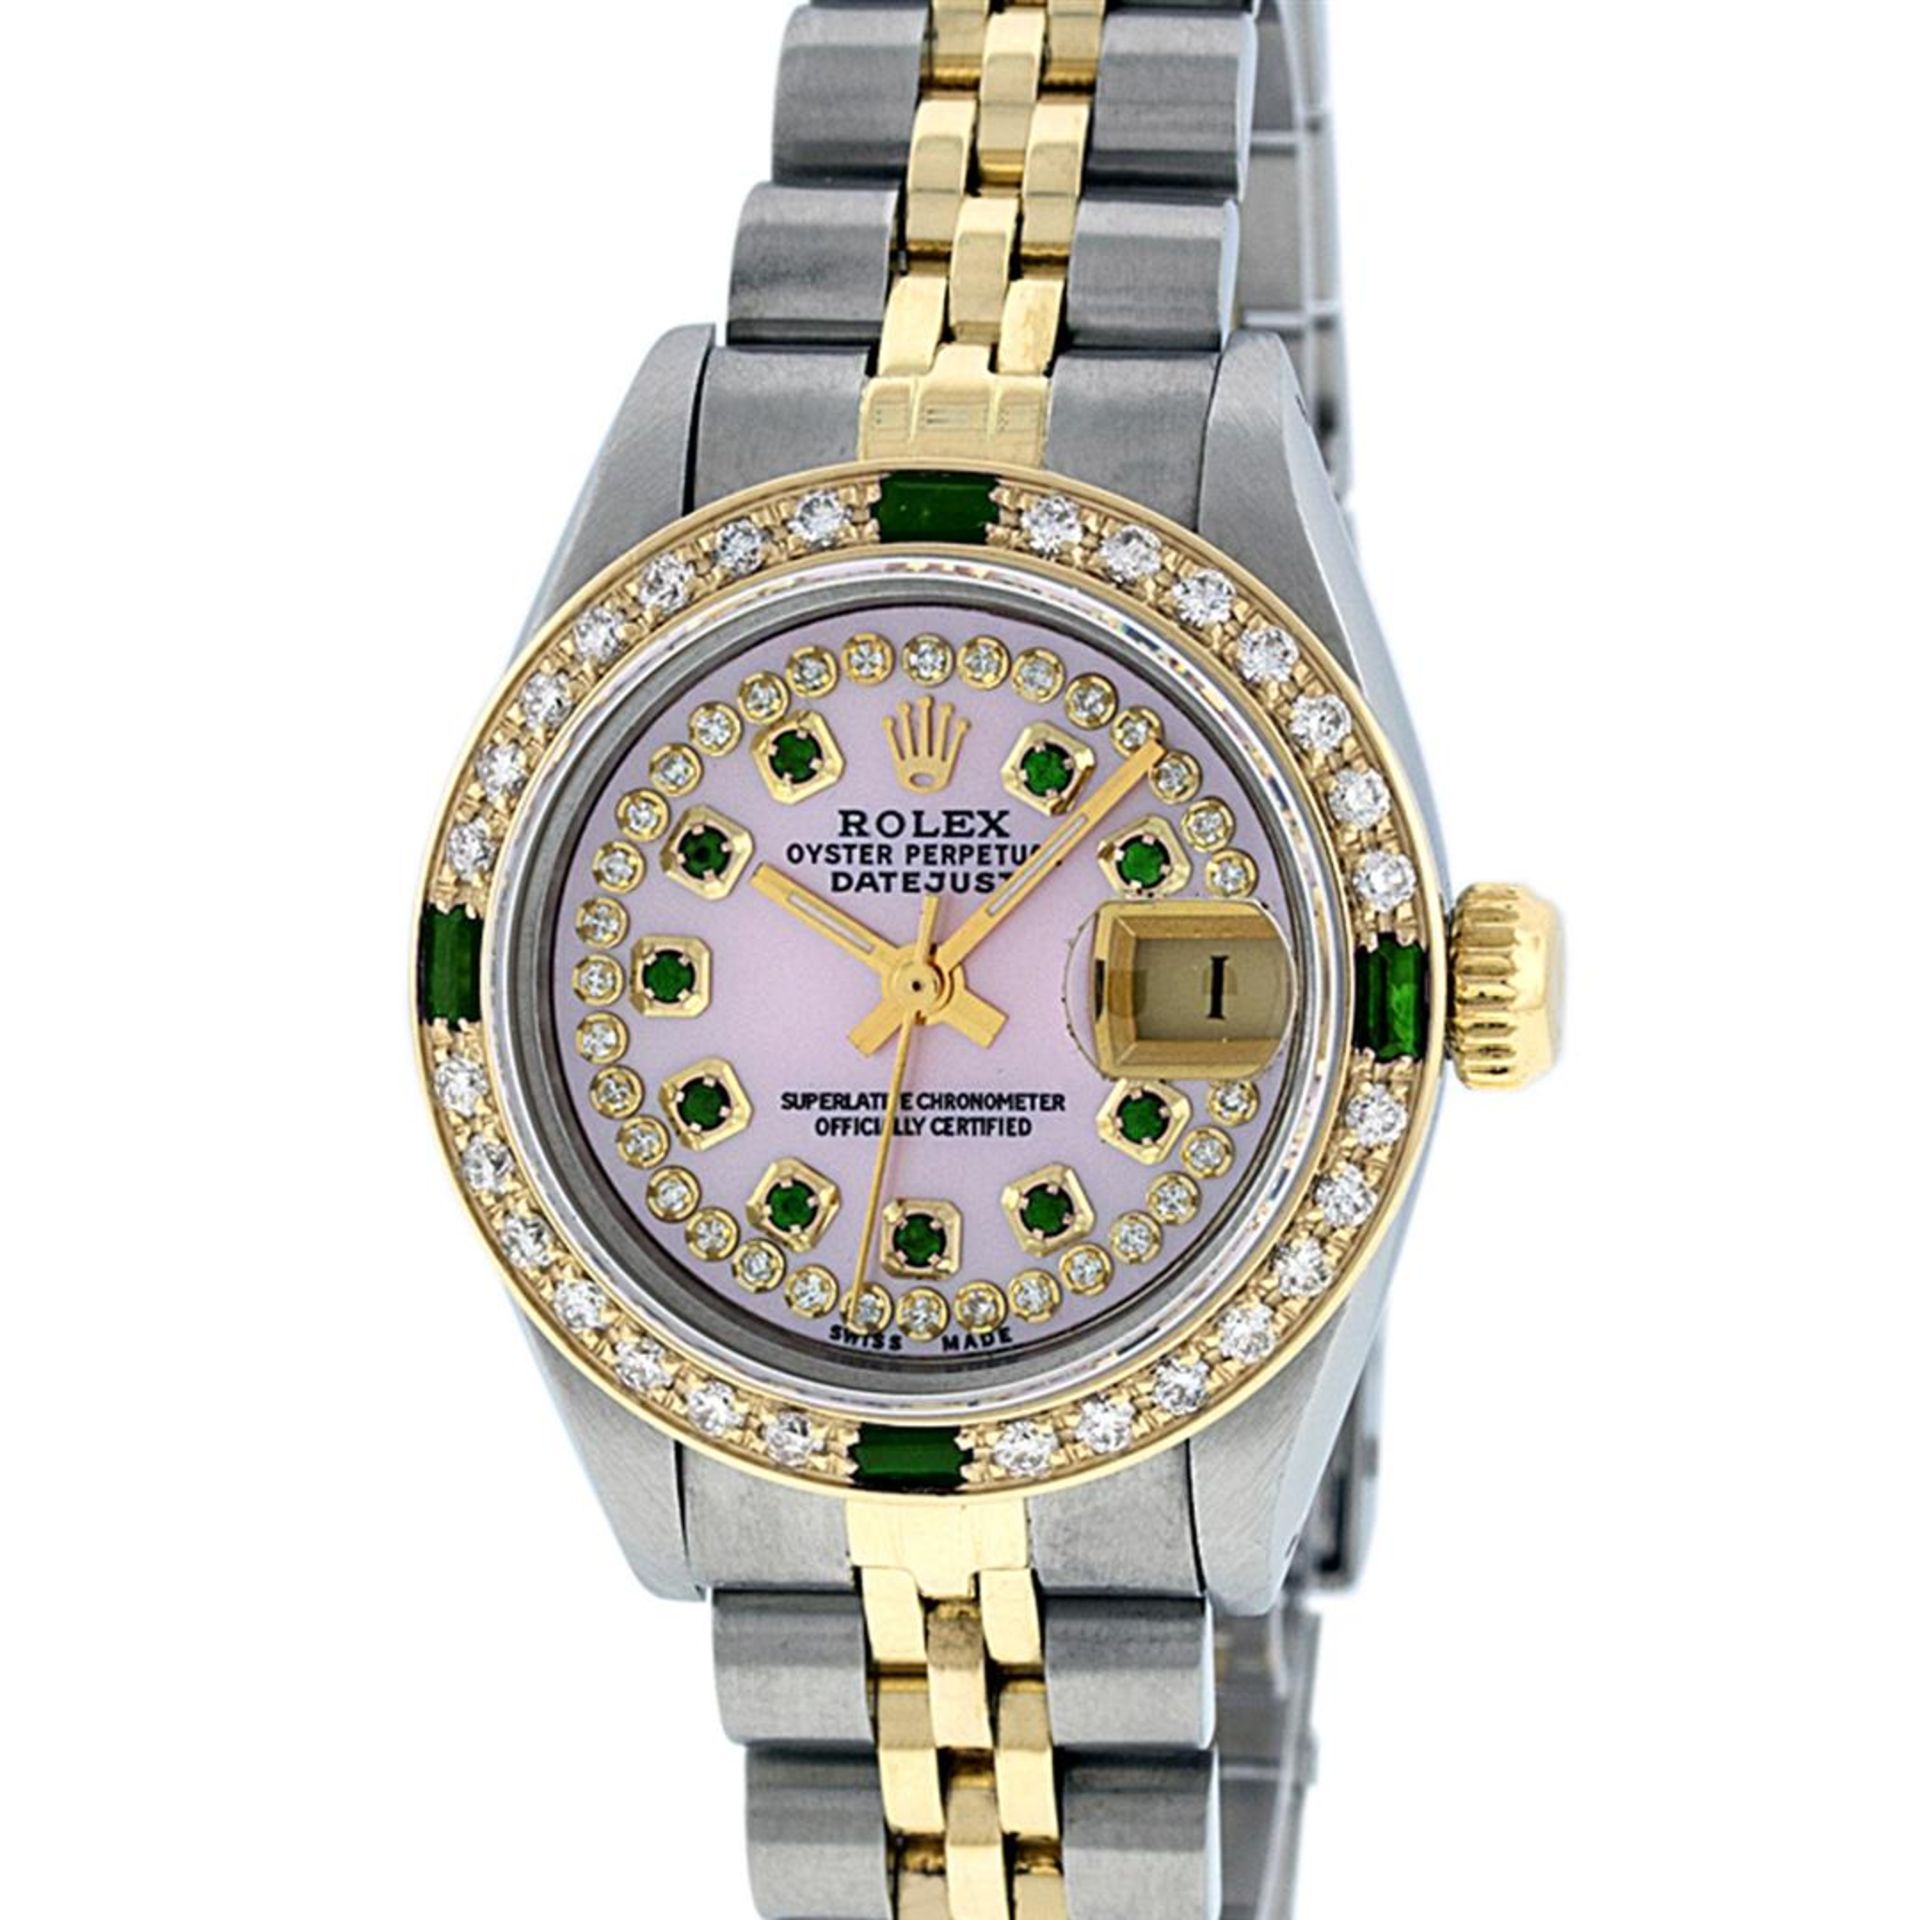 Rolex Ladies 2 Tone MOP Diamond & Emerald Oyster Perpetual Datejust Wristwatch - Image 3 of 9